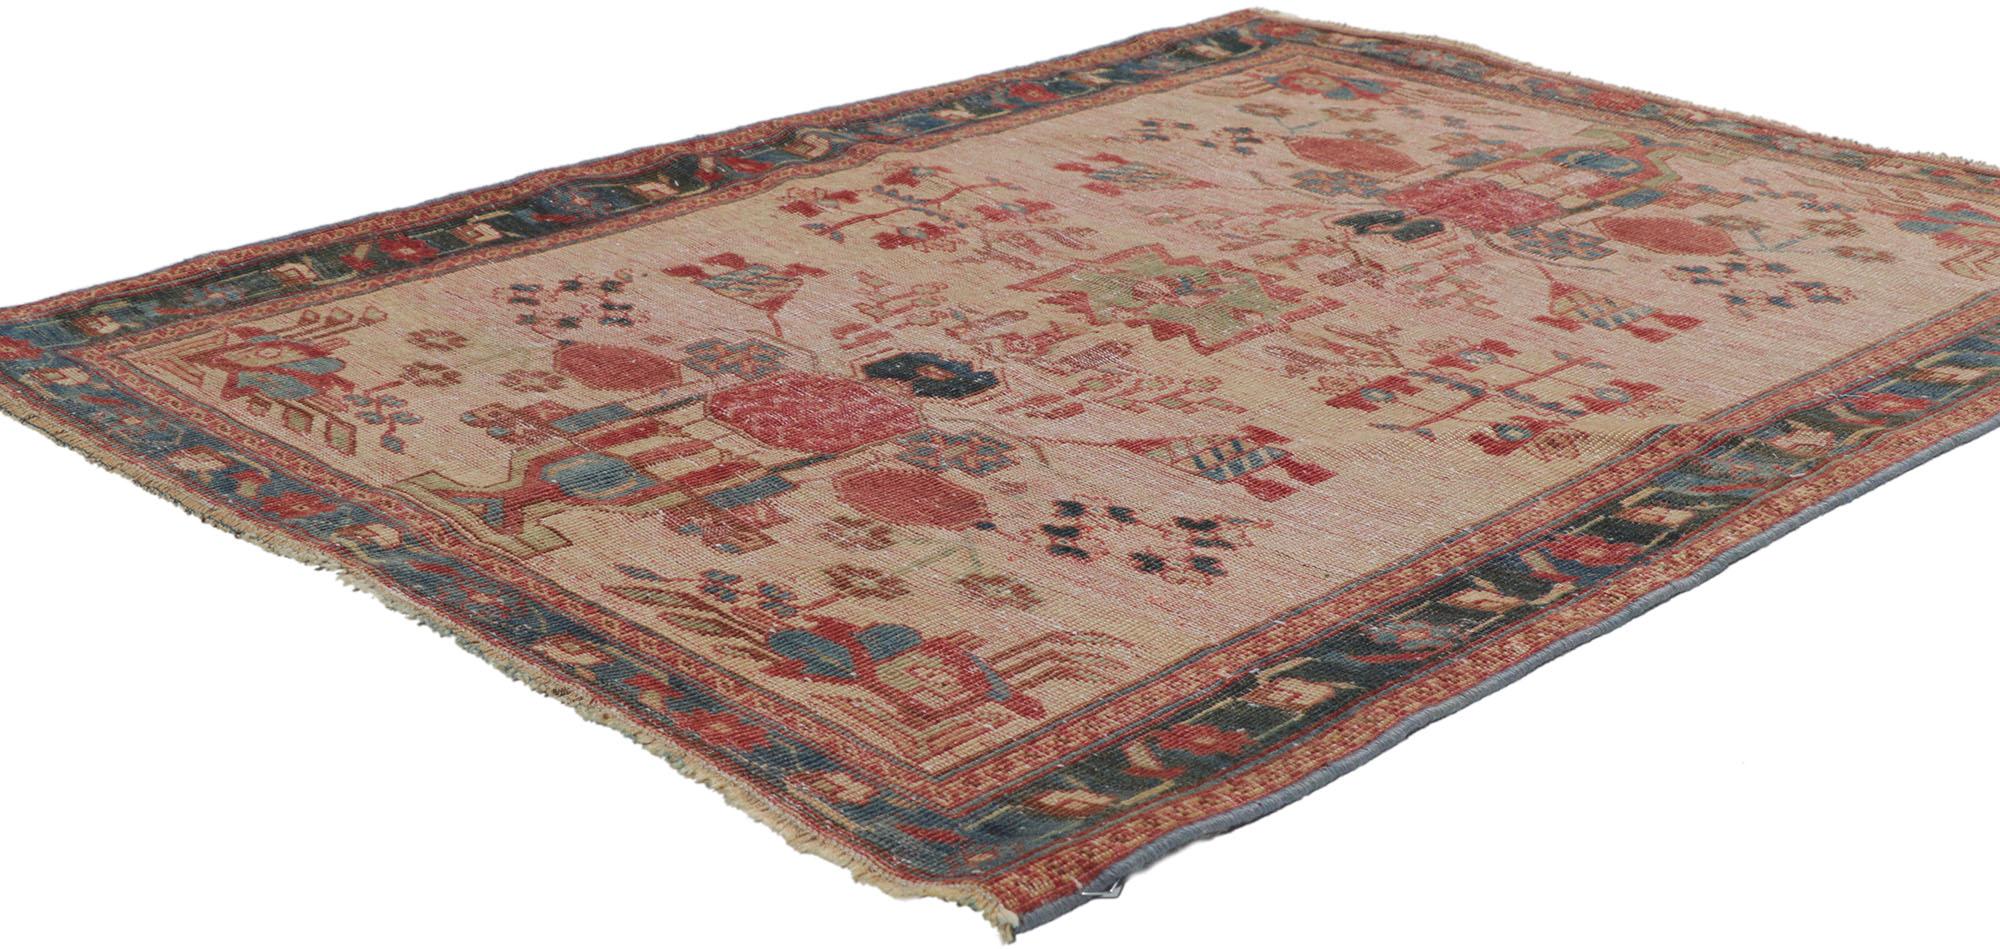 61000 Distressed Antique Persian Ghashghaei Rug 03'04 x 04'02. Rendered in variegated shades of rose, cerulean, blue, pink, red, taupe, light green, brick red, tan, and navy blue with other accent colors. Distressed. Desirable Age Wear. Antique